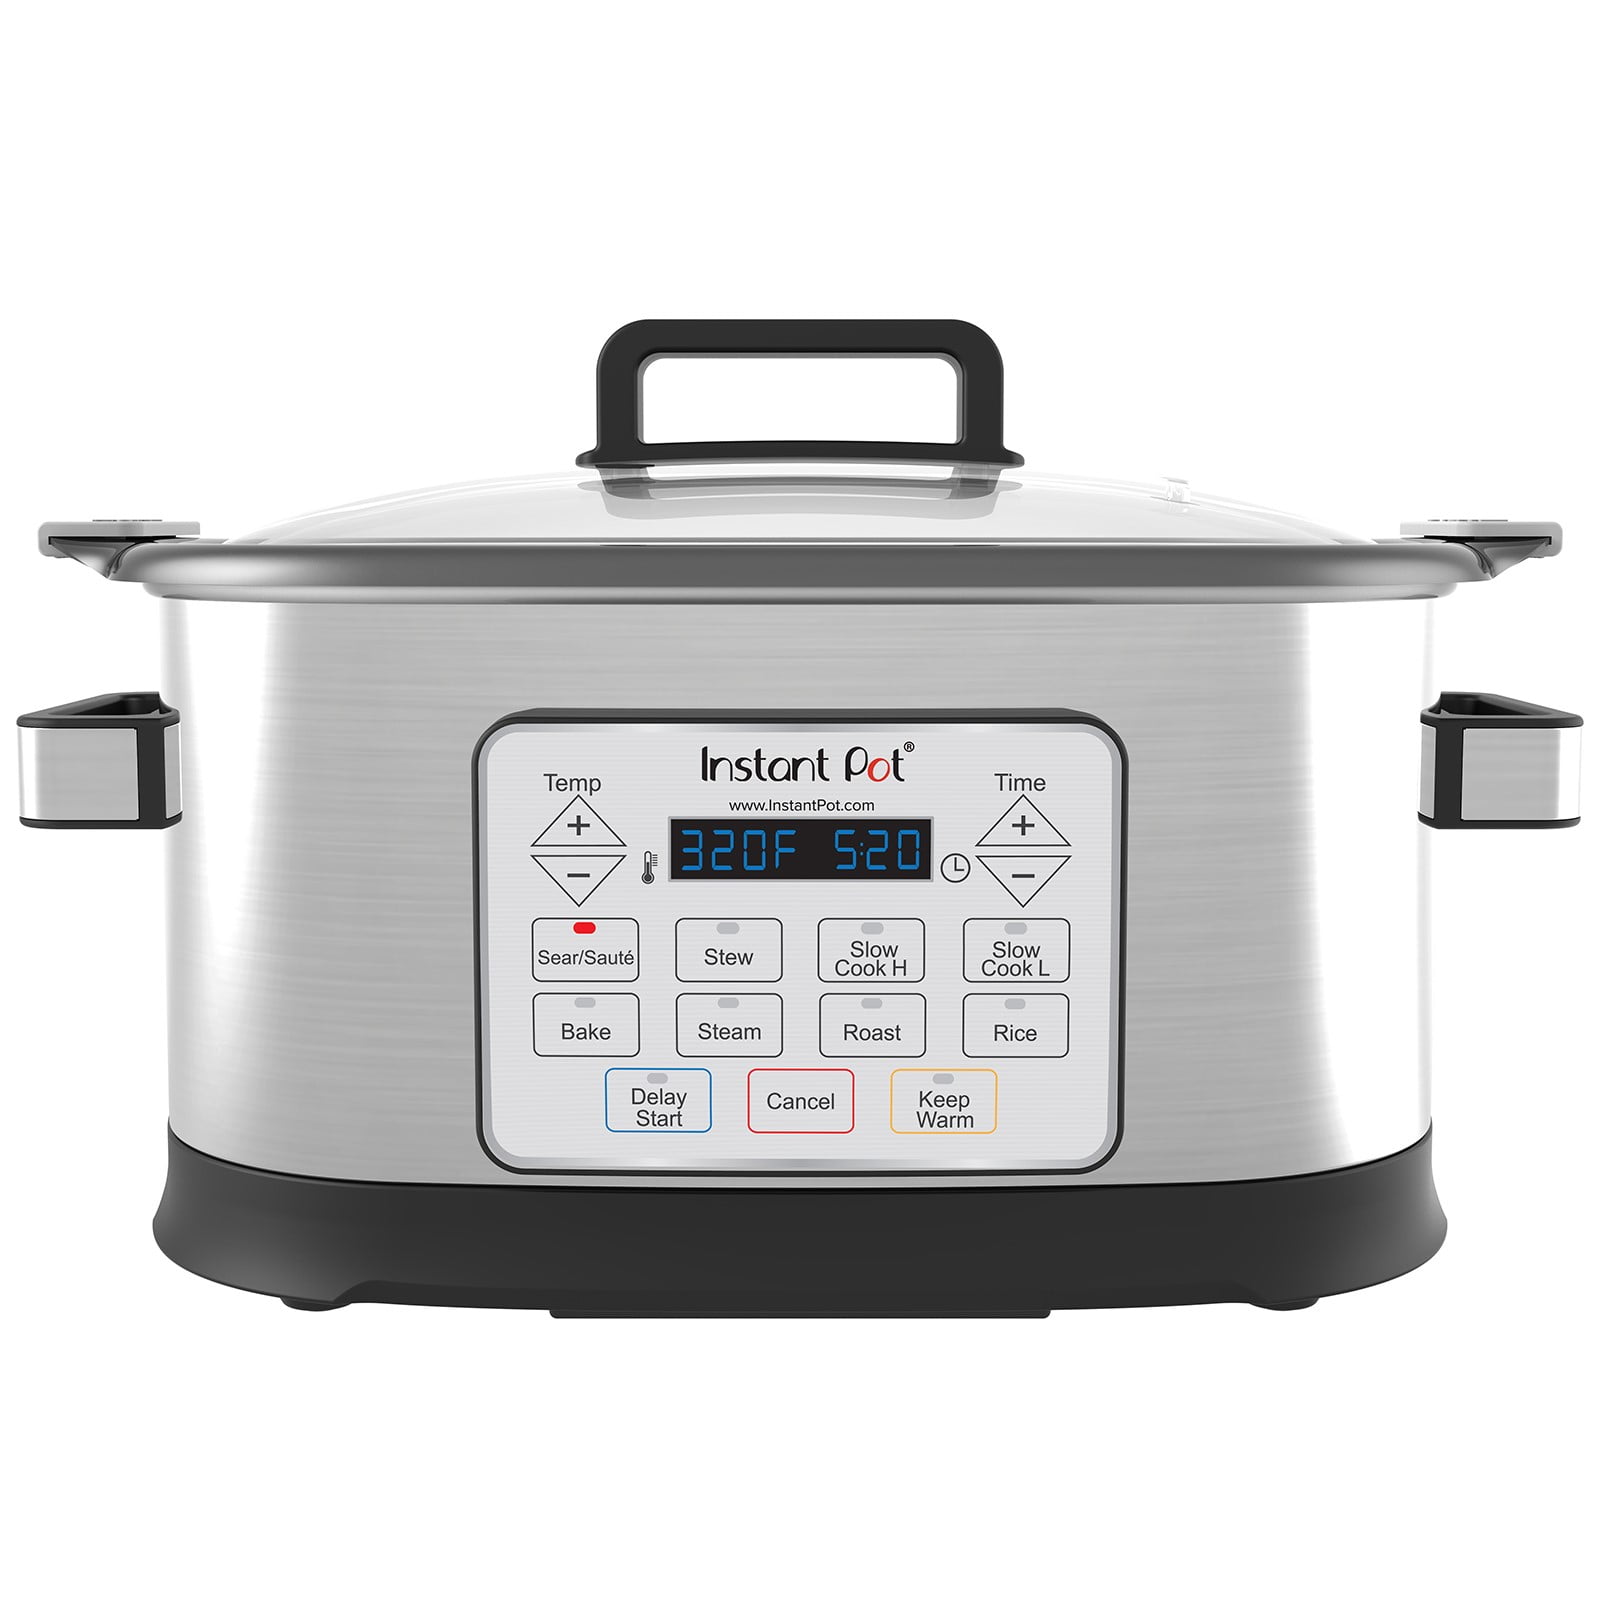 Instant Pot's app-controlled Wi-Fi Multi-Cooker now $90 (Reg. $150